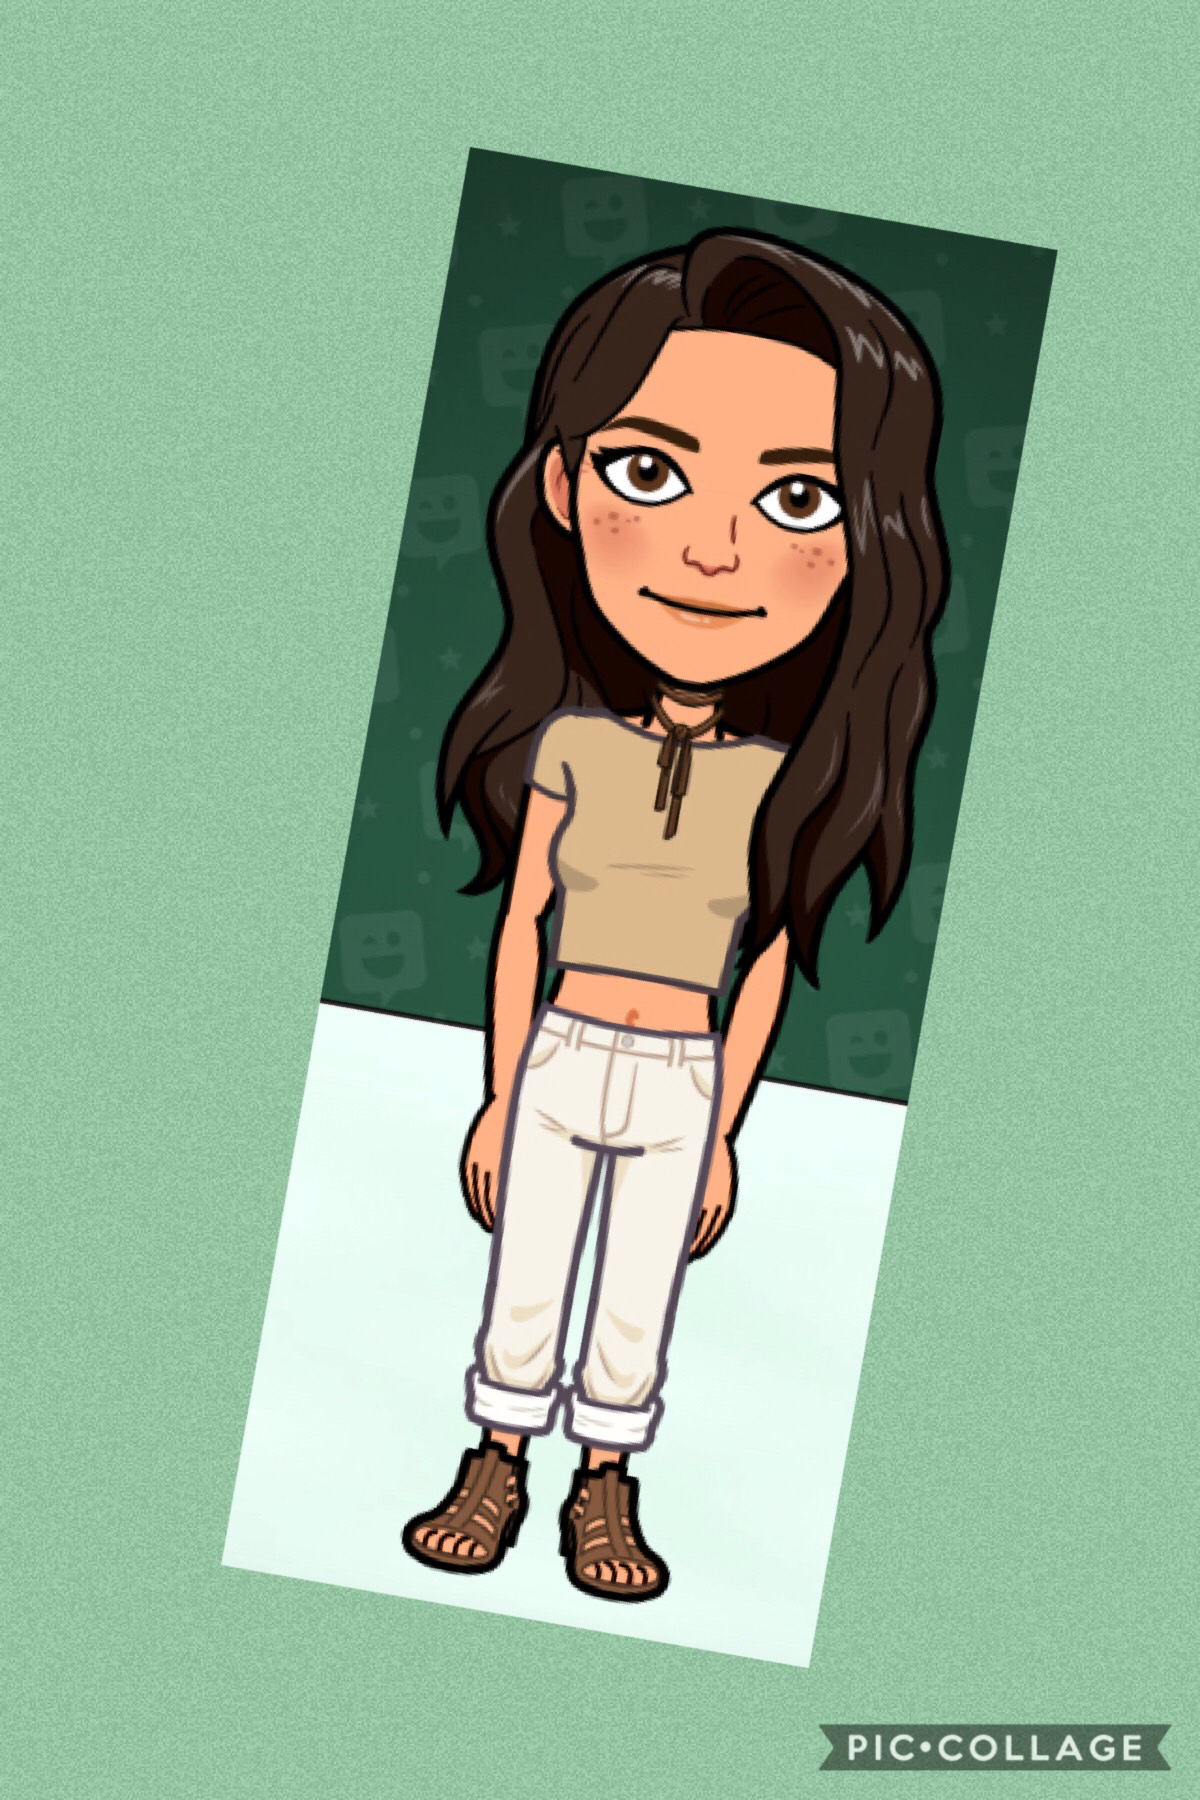 Another Bitmoji picture! This one is kinda what I look like!